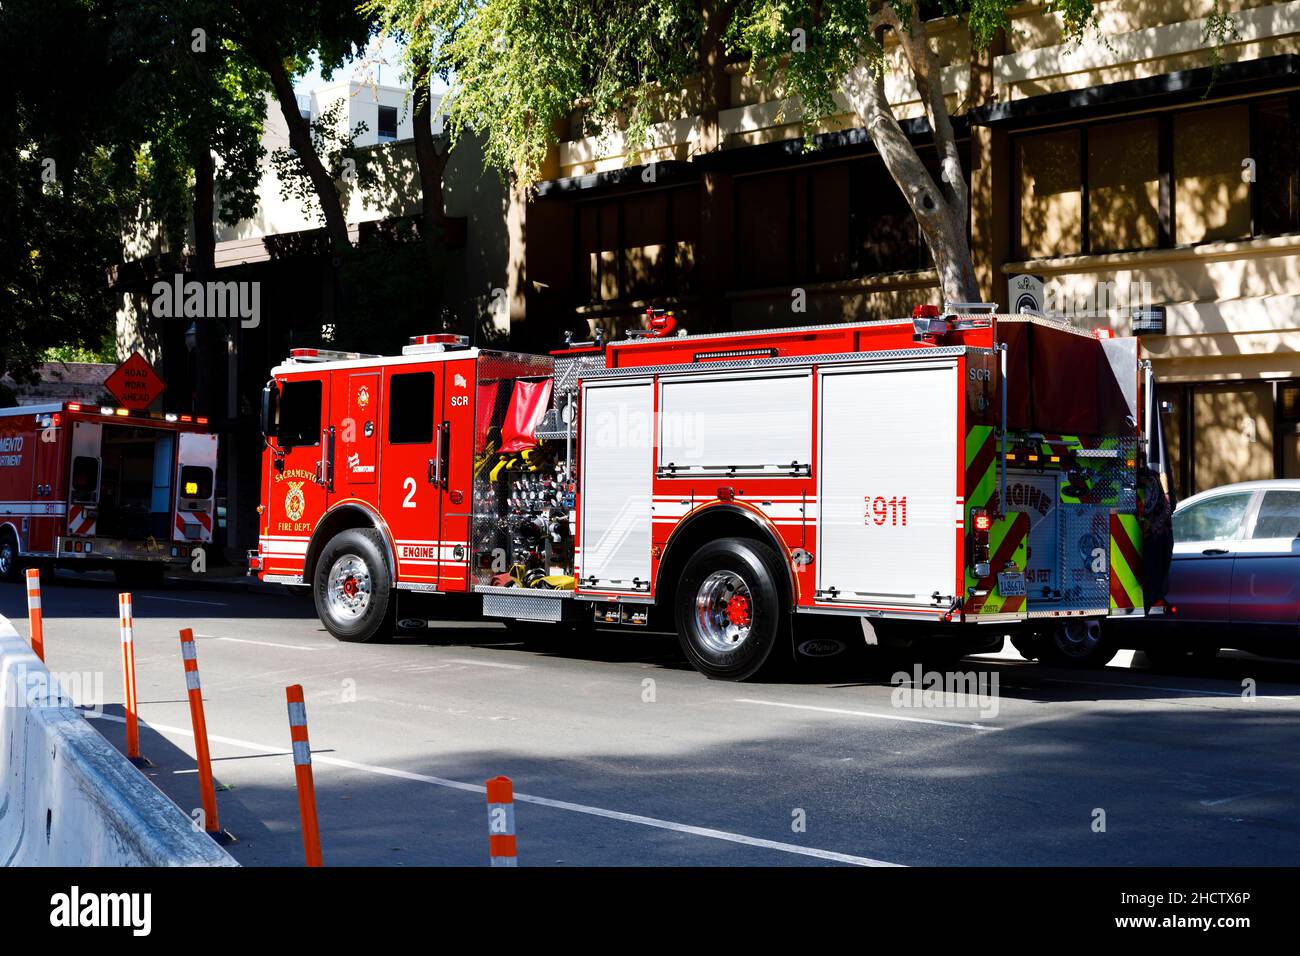 Pierce Fire engine pumper appliance #2 from the Sacramento Fire Department on call at 1st Street, Sacramento, California, United States of America Stock Photo